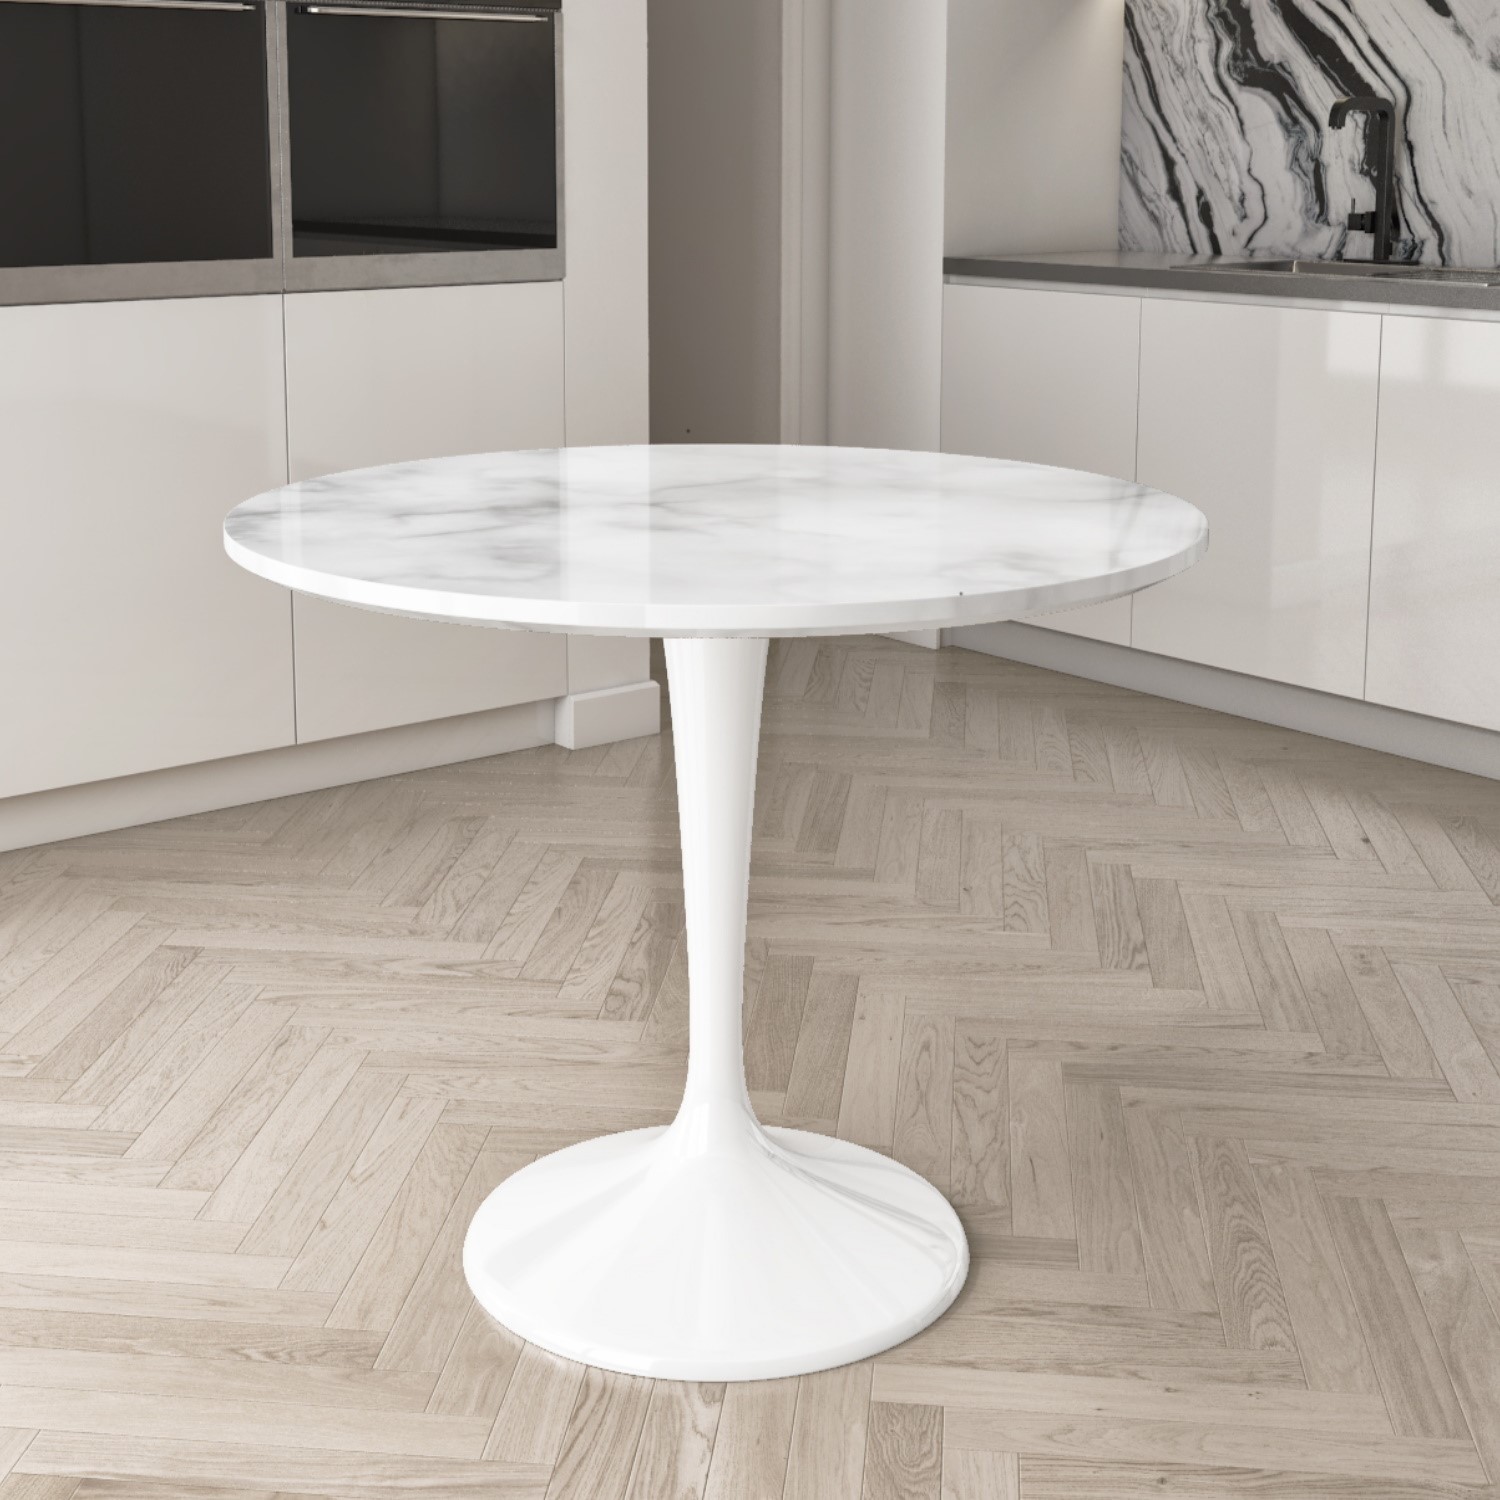 High Gloss Marble Dining Table With, Round White Dining Tables For 4